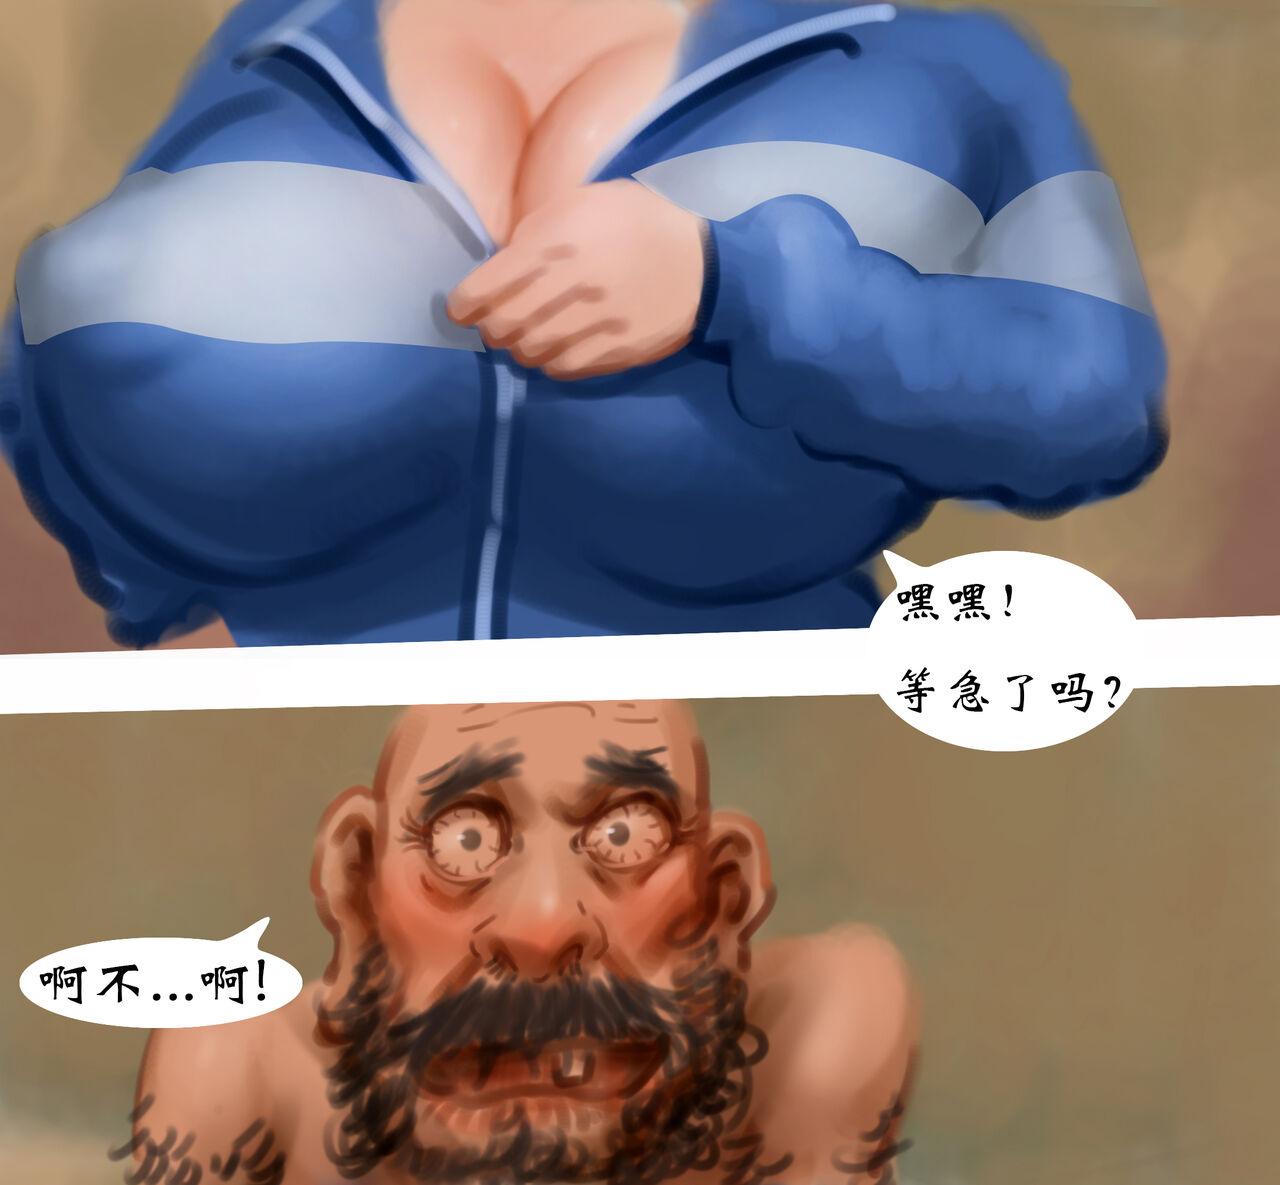 Indoor 【变态少女】【彩色】-黑暗魔巢 Muscular - Picture 2